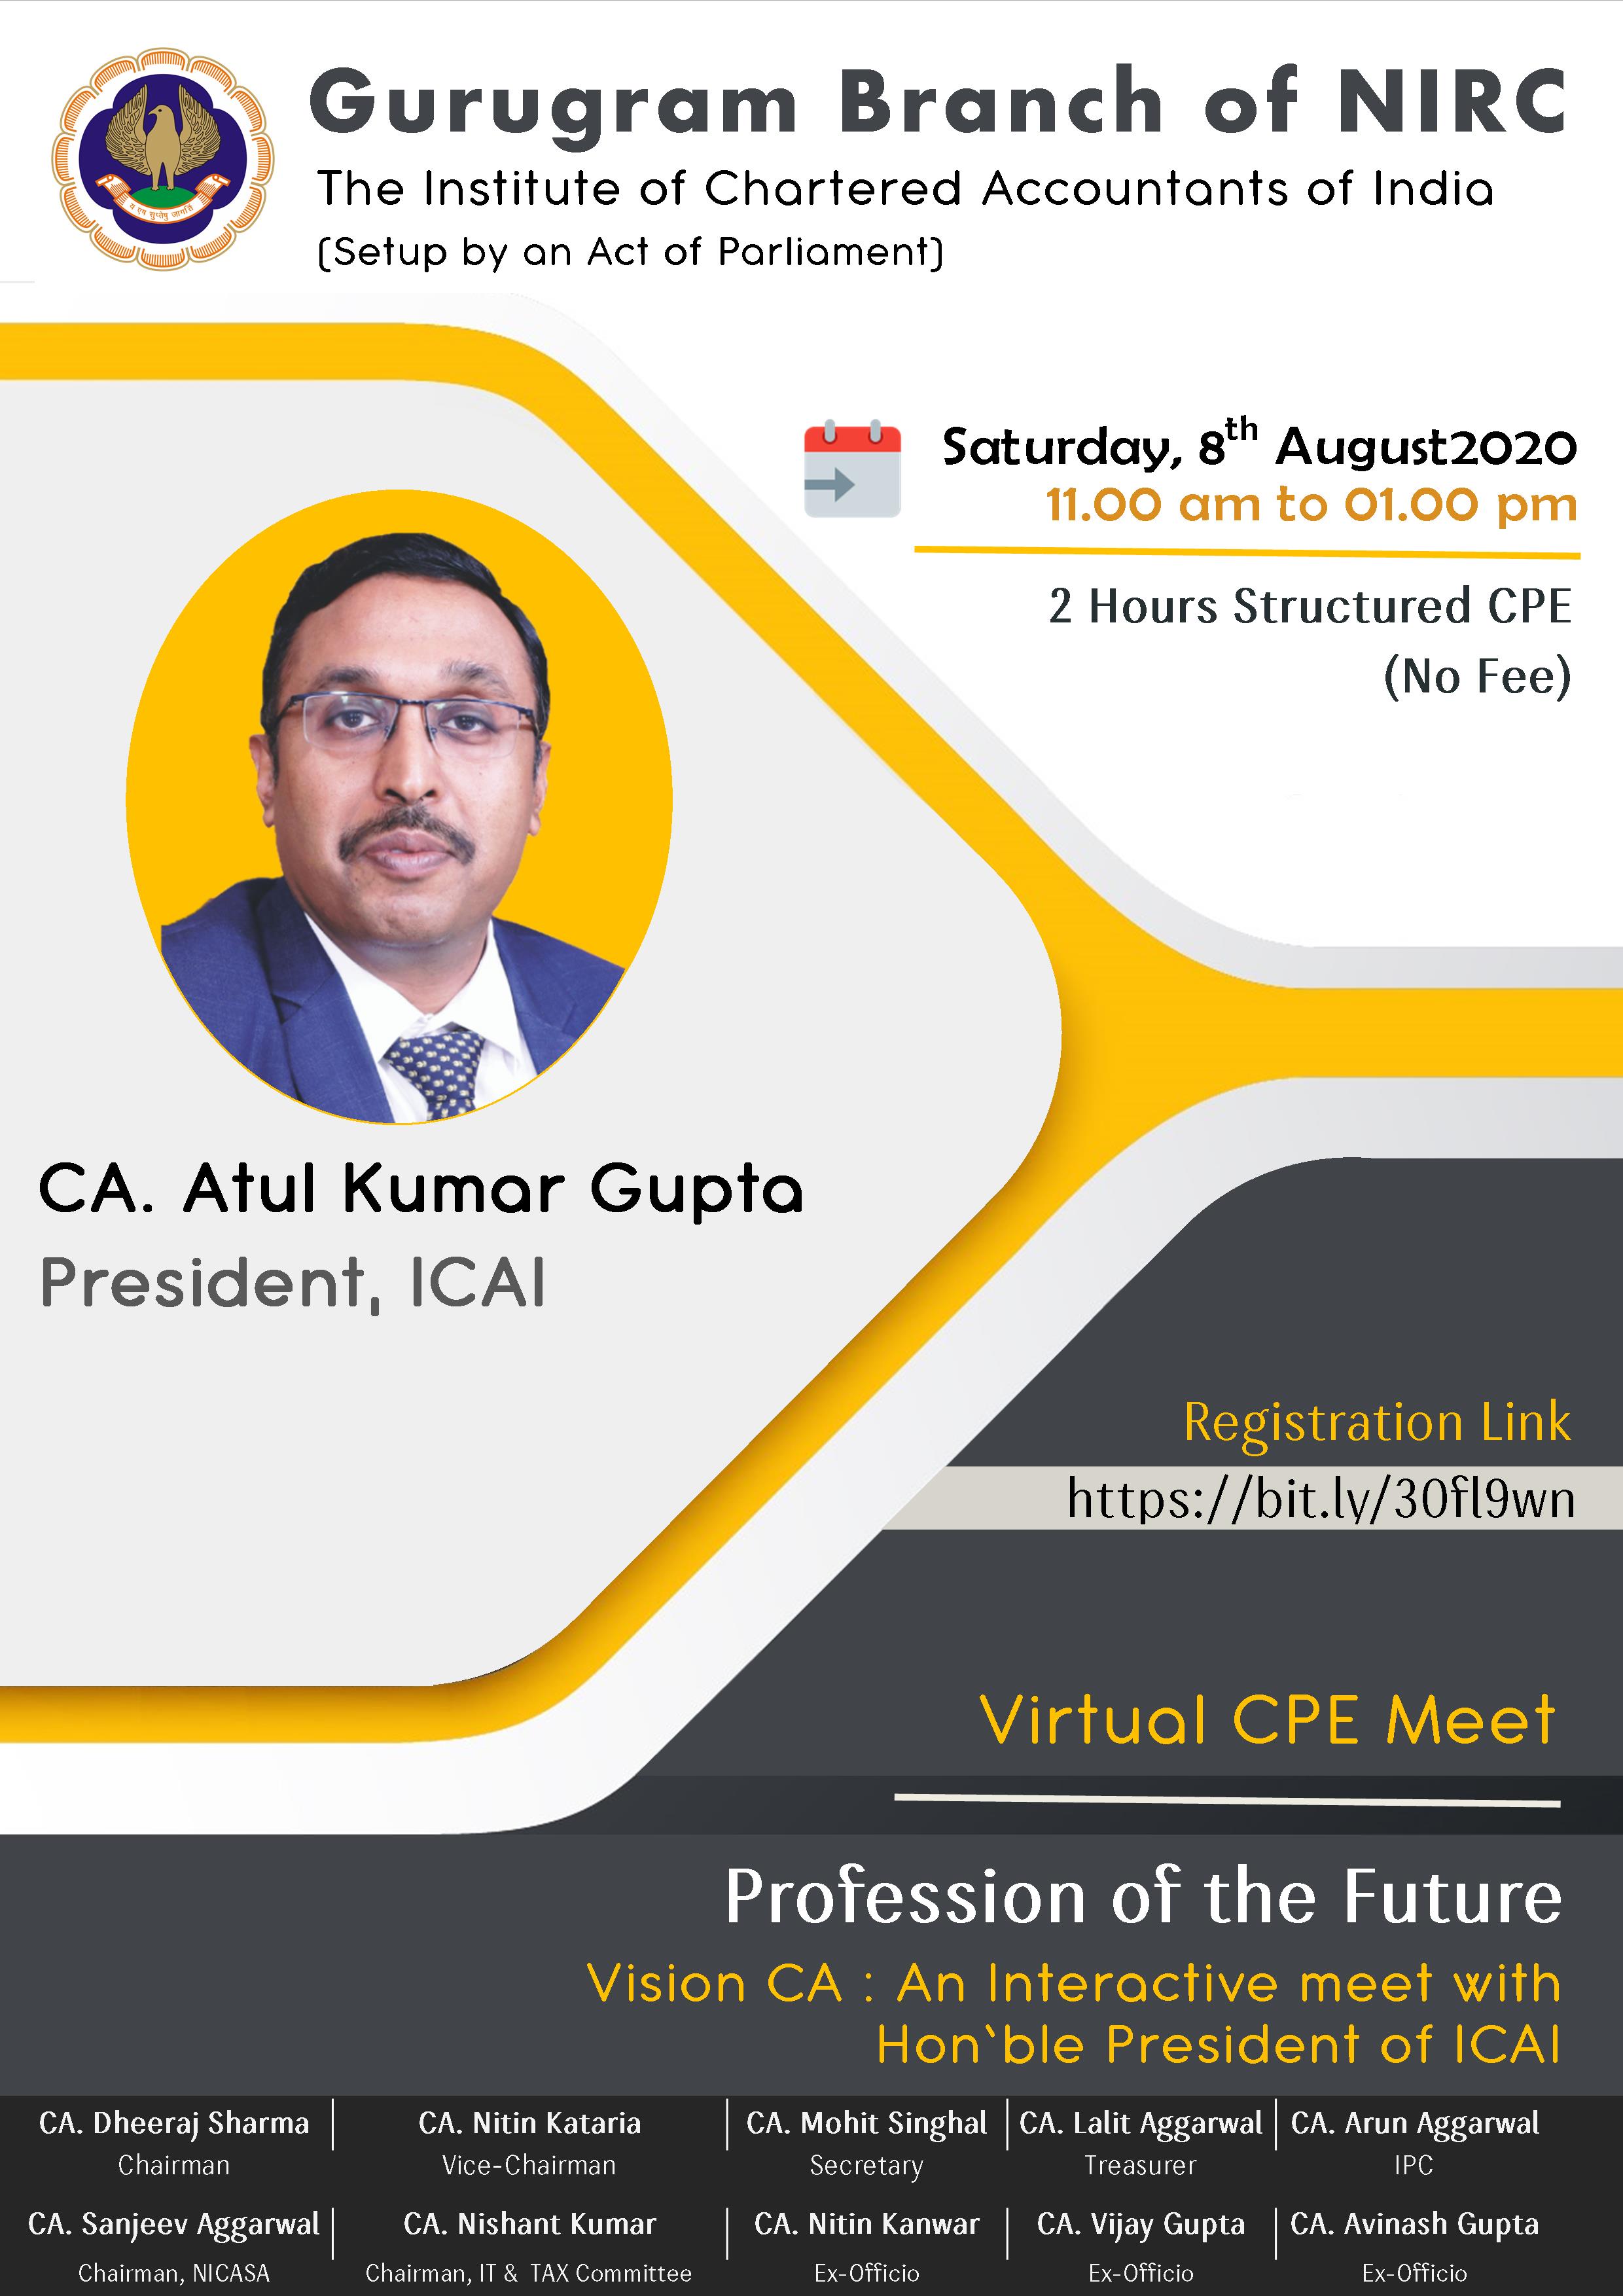 Virtual CPE Meeting on Future of the Profession